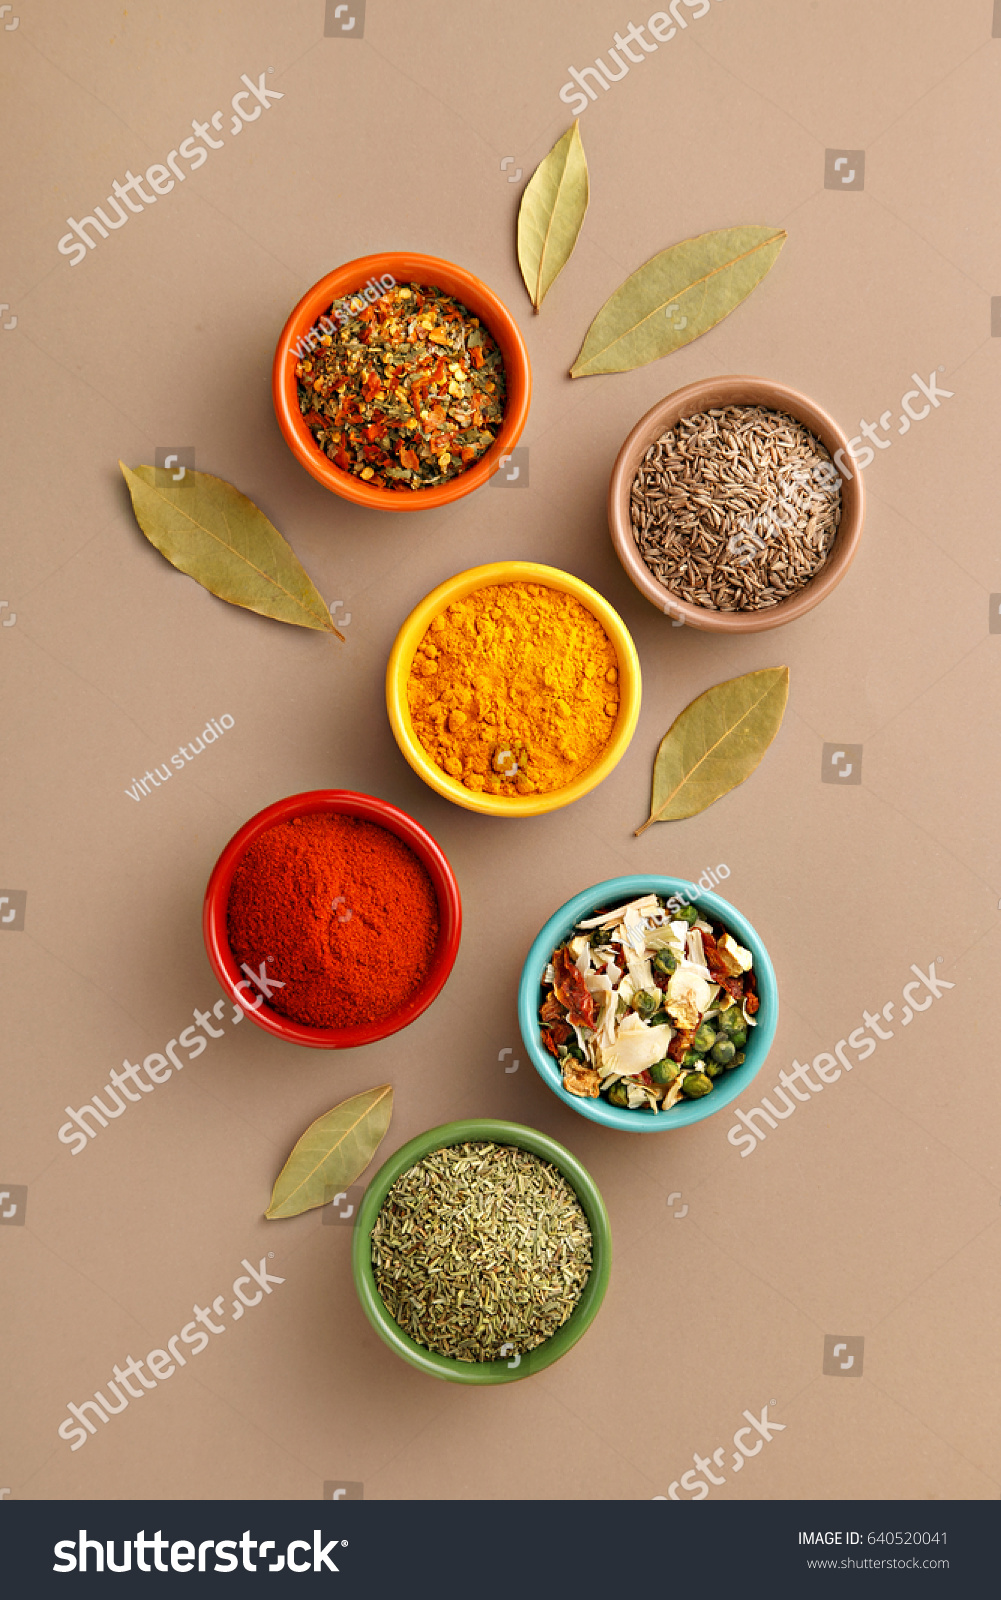 Spices in colorful bowls viewed from above. Various seasonings on a dark background. Italian mix, cumin, chili pepper, curry powder, Himalayan salt, pepper, garlic, cinnamon, dried tomato. Top view #640520041